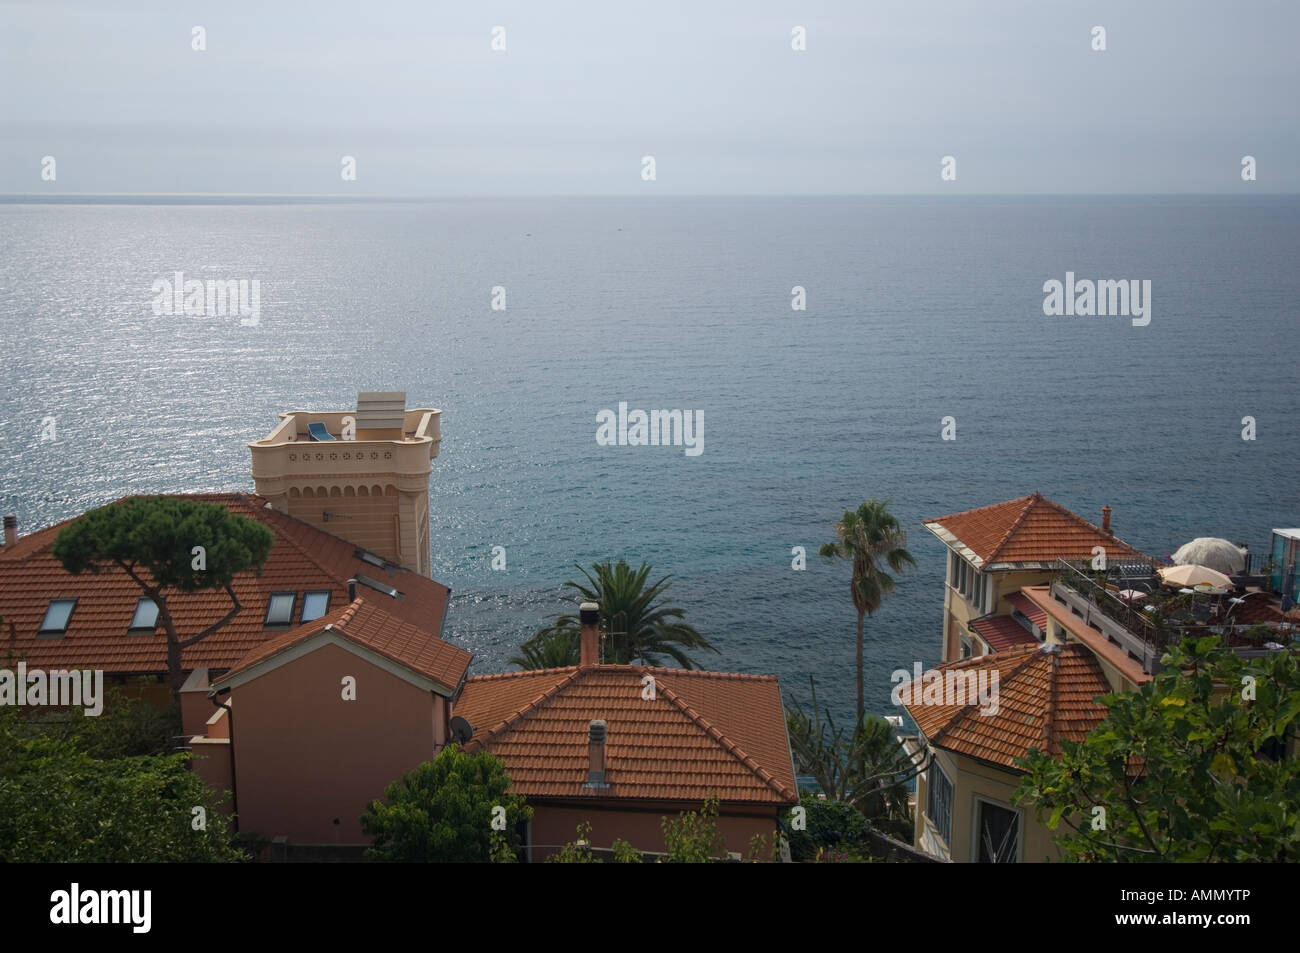 View of the Mediterranian from Portomorizzio showing the Sea and Terracotta Roof tiles and Palm Trees. Stock Photo